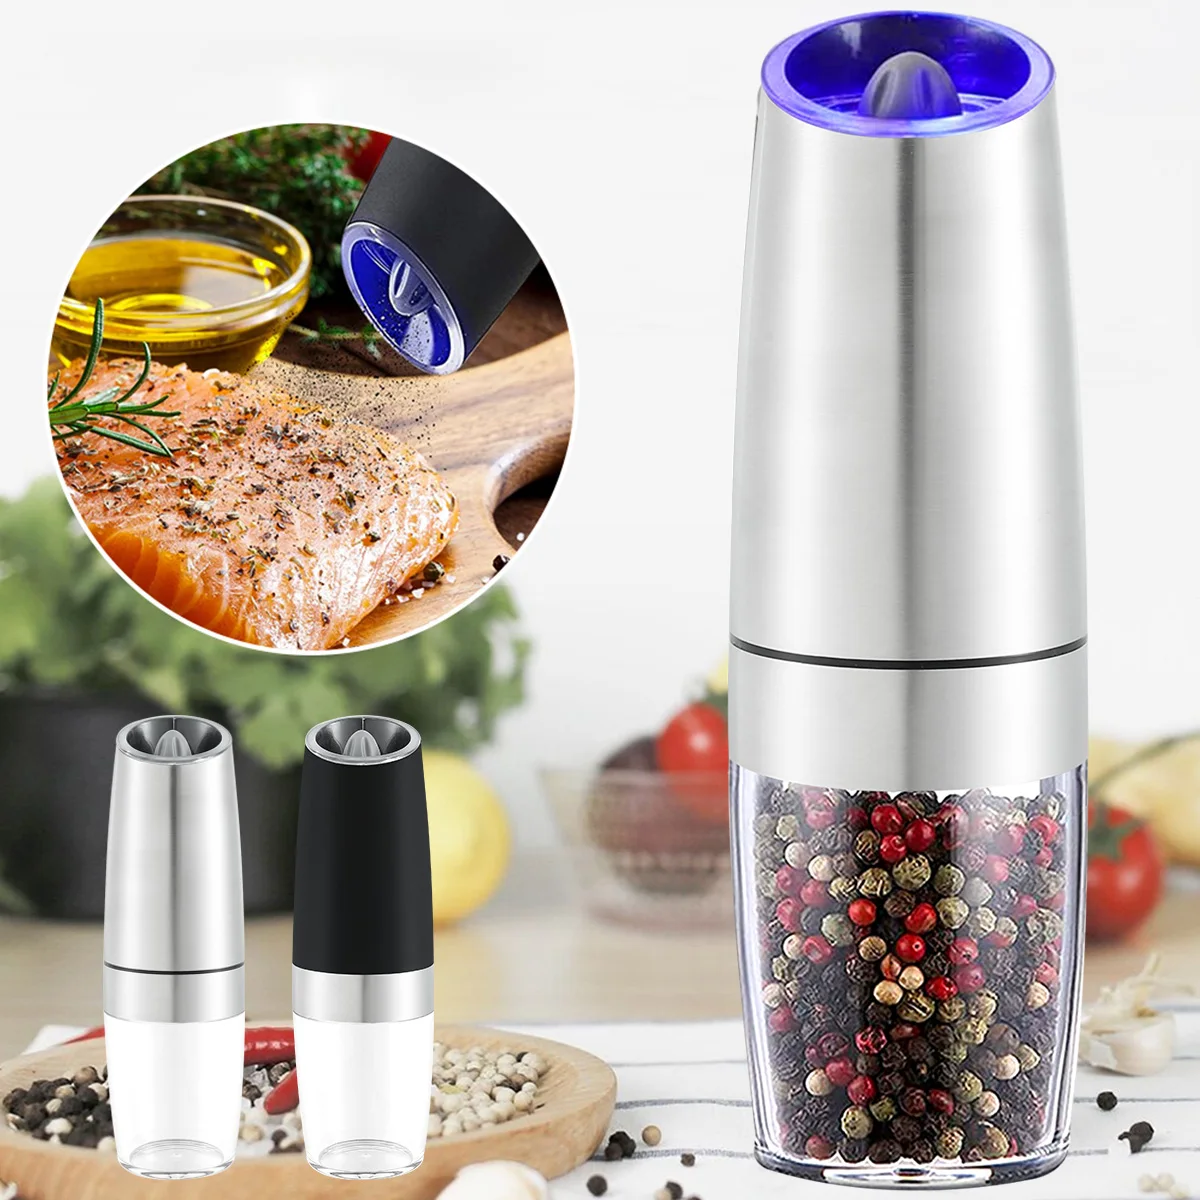 

Stainless Steel Electric Pepper Grinders Adjustable Roughness Automatic Gravity Sensor Salt Mill Grinder Battery Operated